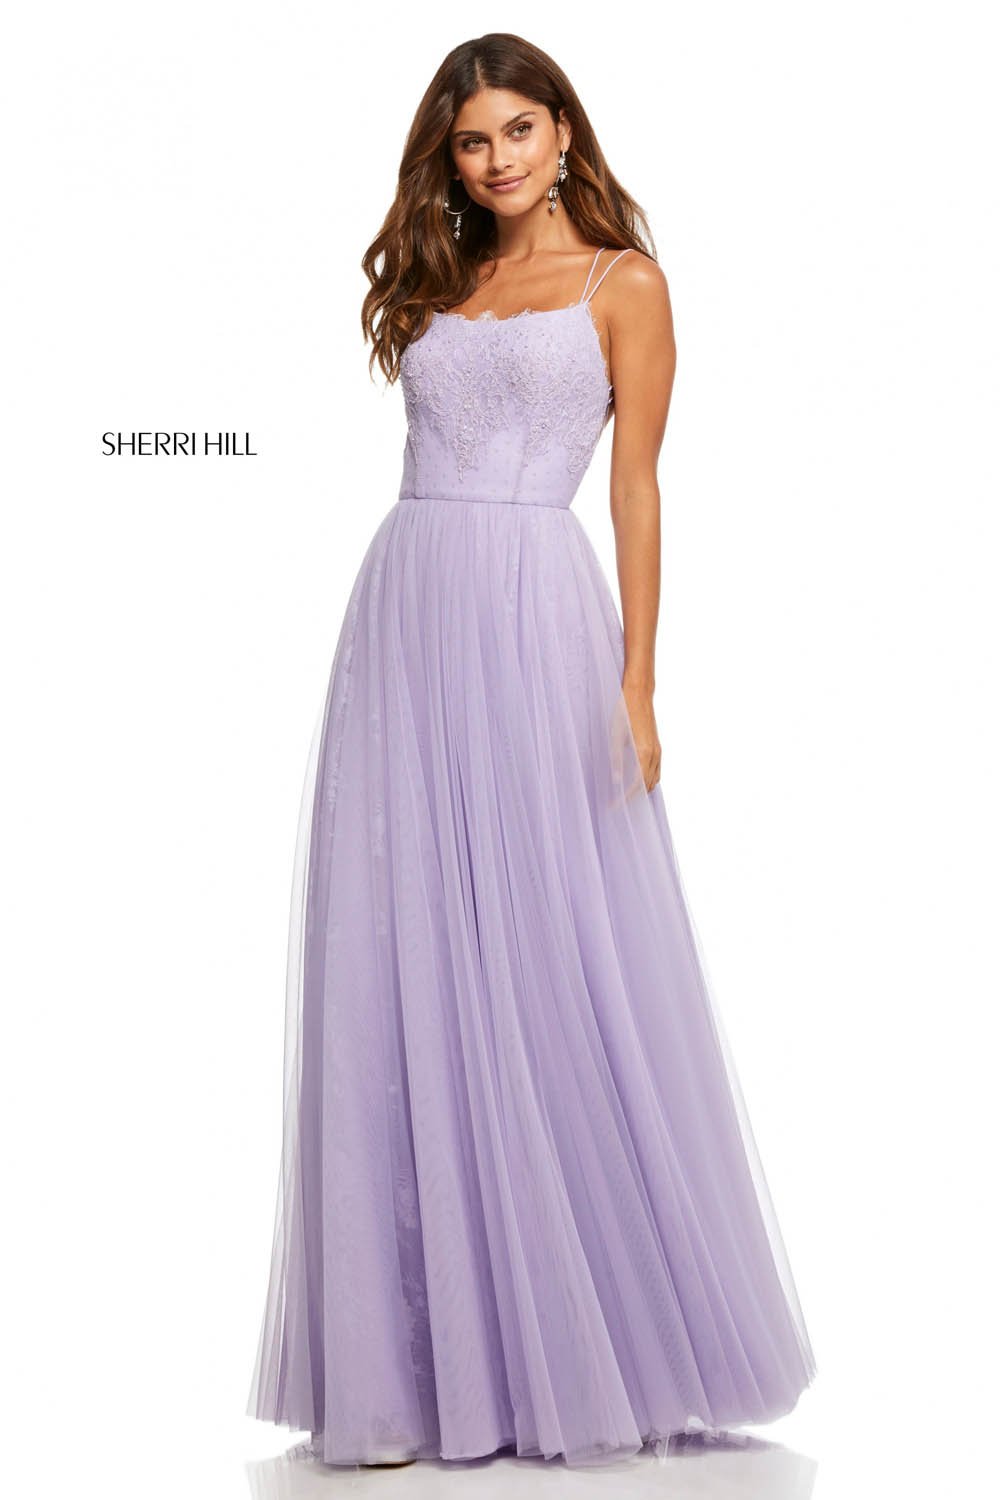 Sherri Hill 52652 dress images in these colors: Light Blue, Lilac, Yellow, Ivory, Blush.